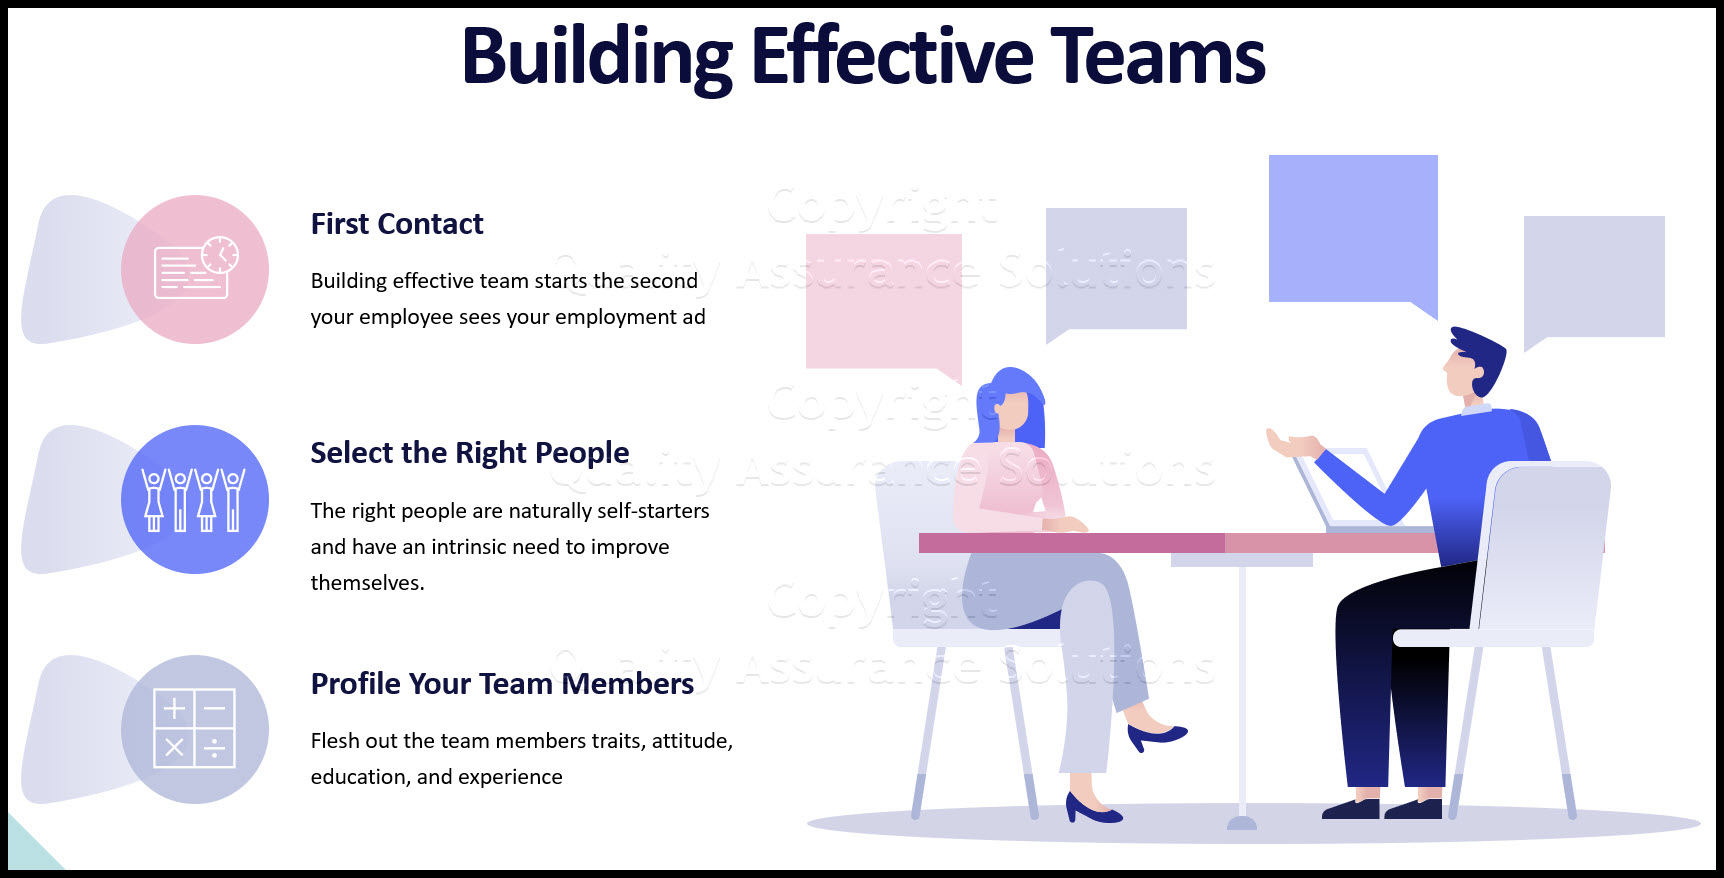 Building effective teams is the most important thing a leader does.  Learn how to start this process right from the first contact.